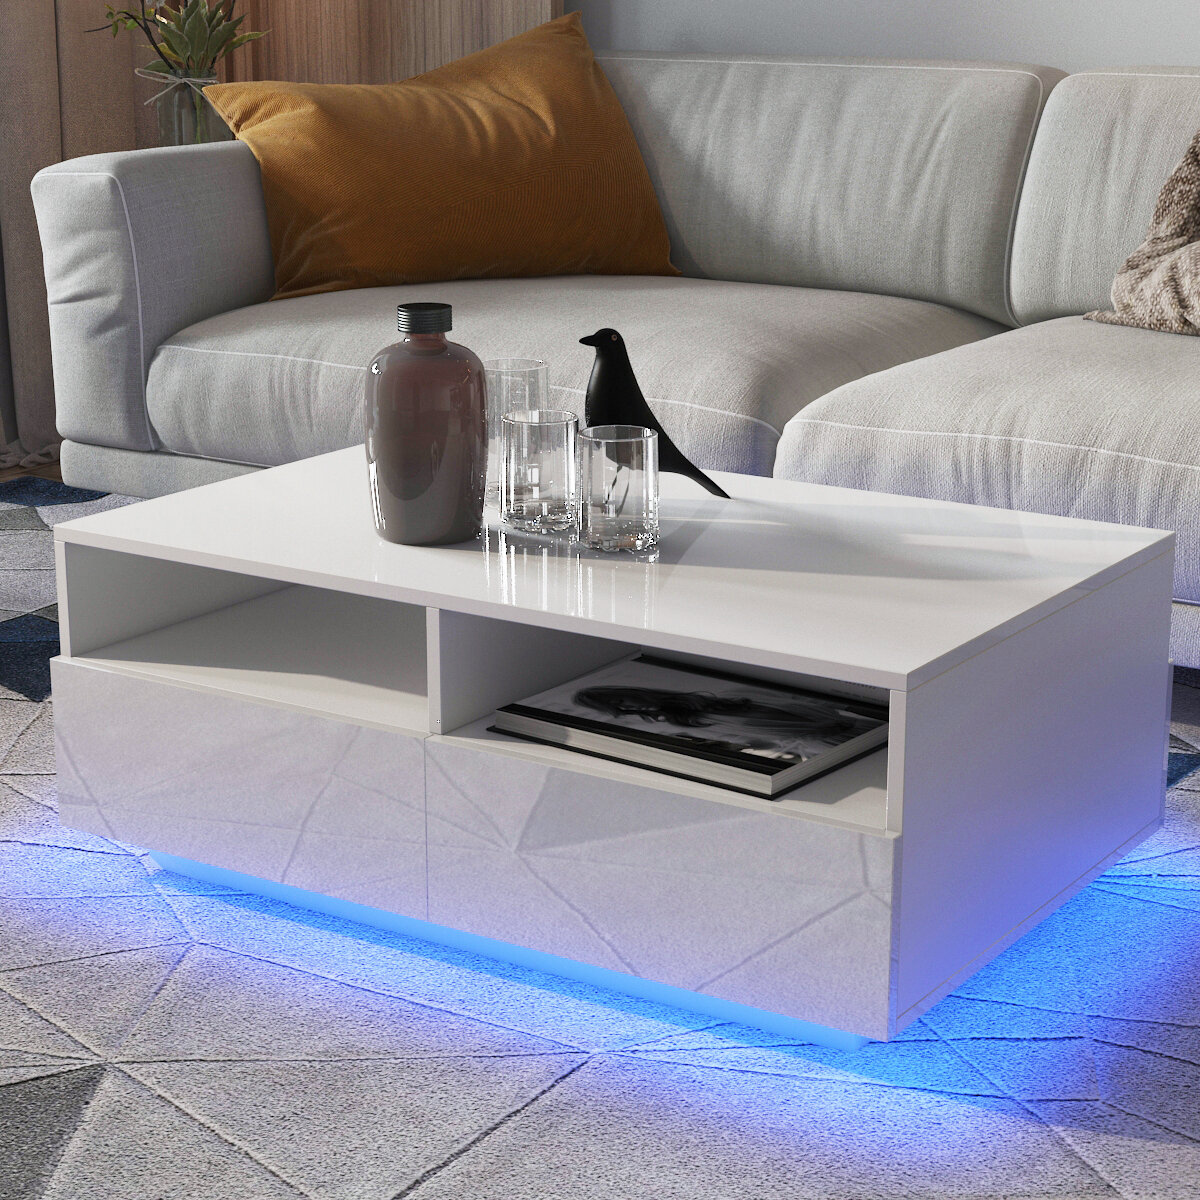 Image of Modern RGB LED Coffee Table with High Gloss 4 Drawers End Side Table White/Black